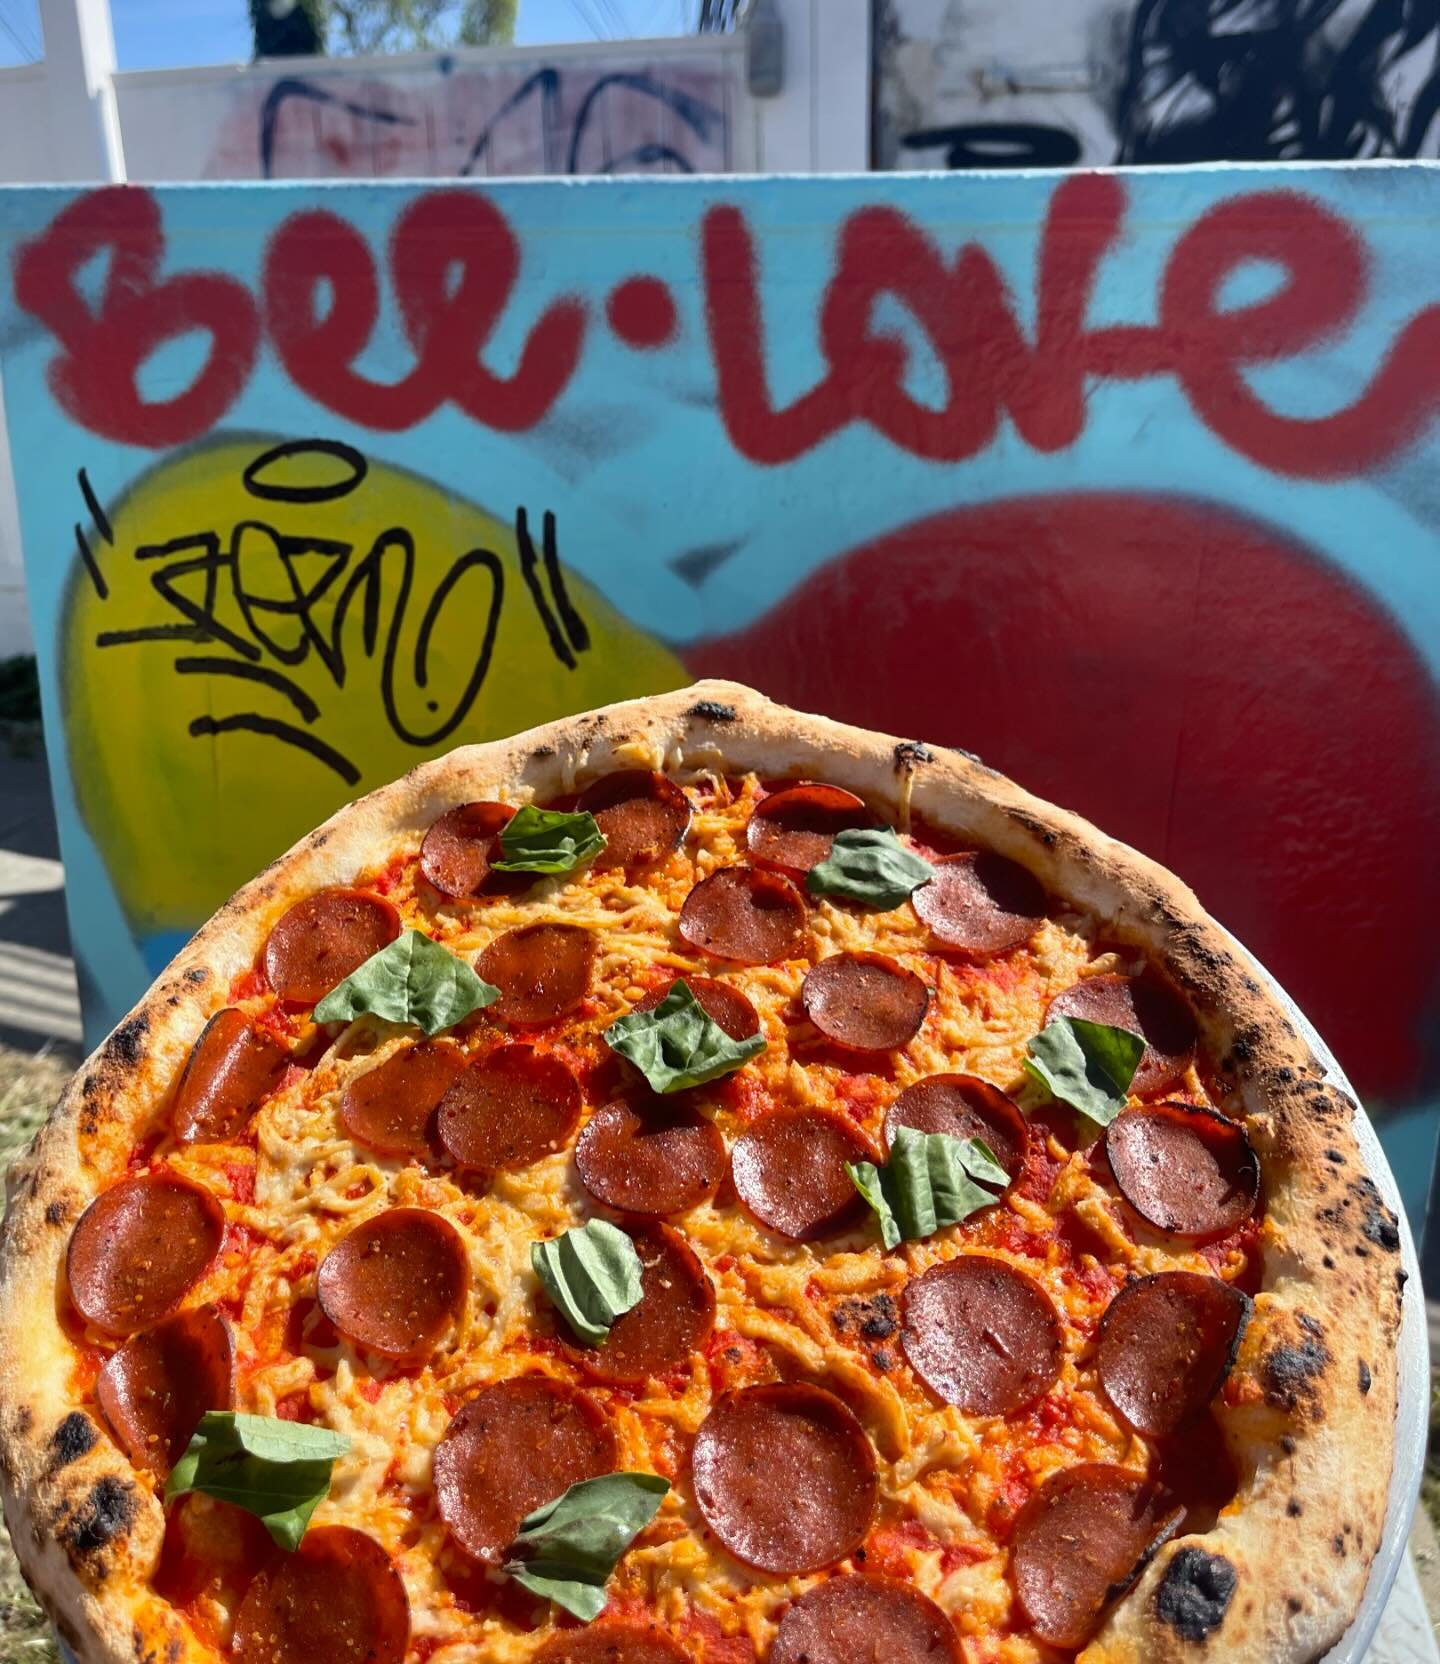 COME GET YOUR VEGAN FIX 

We are so happy to feature @thebehive on all of our vegan pizzas. Pepperoni and cheese so good they&rsquo;ll have you saying &ldquo;that&rsquo;s unBElievable!&rdquo;

This pizza community is something special. Huge shoutout 